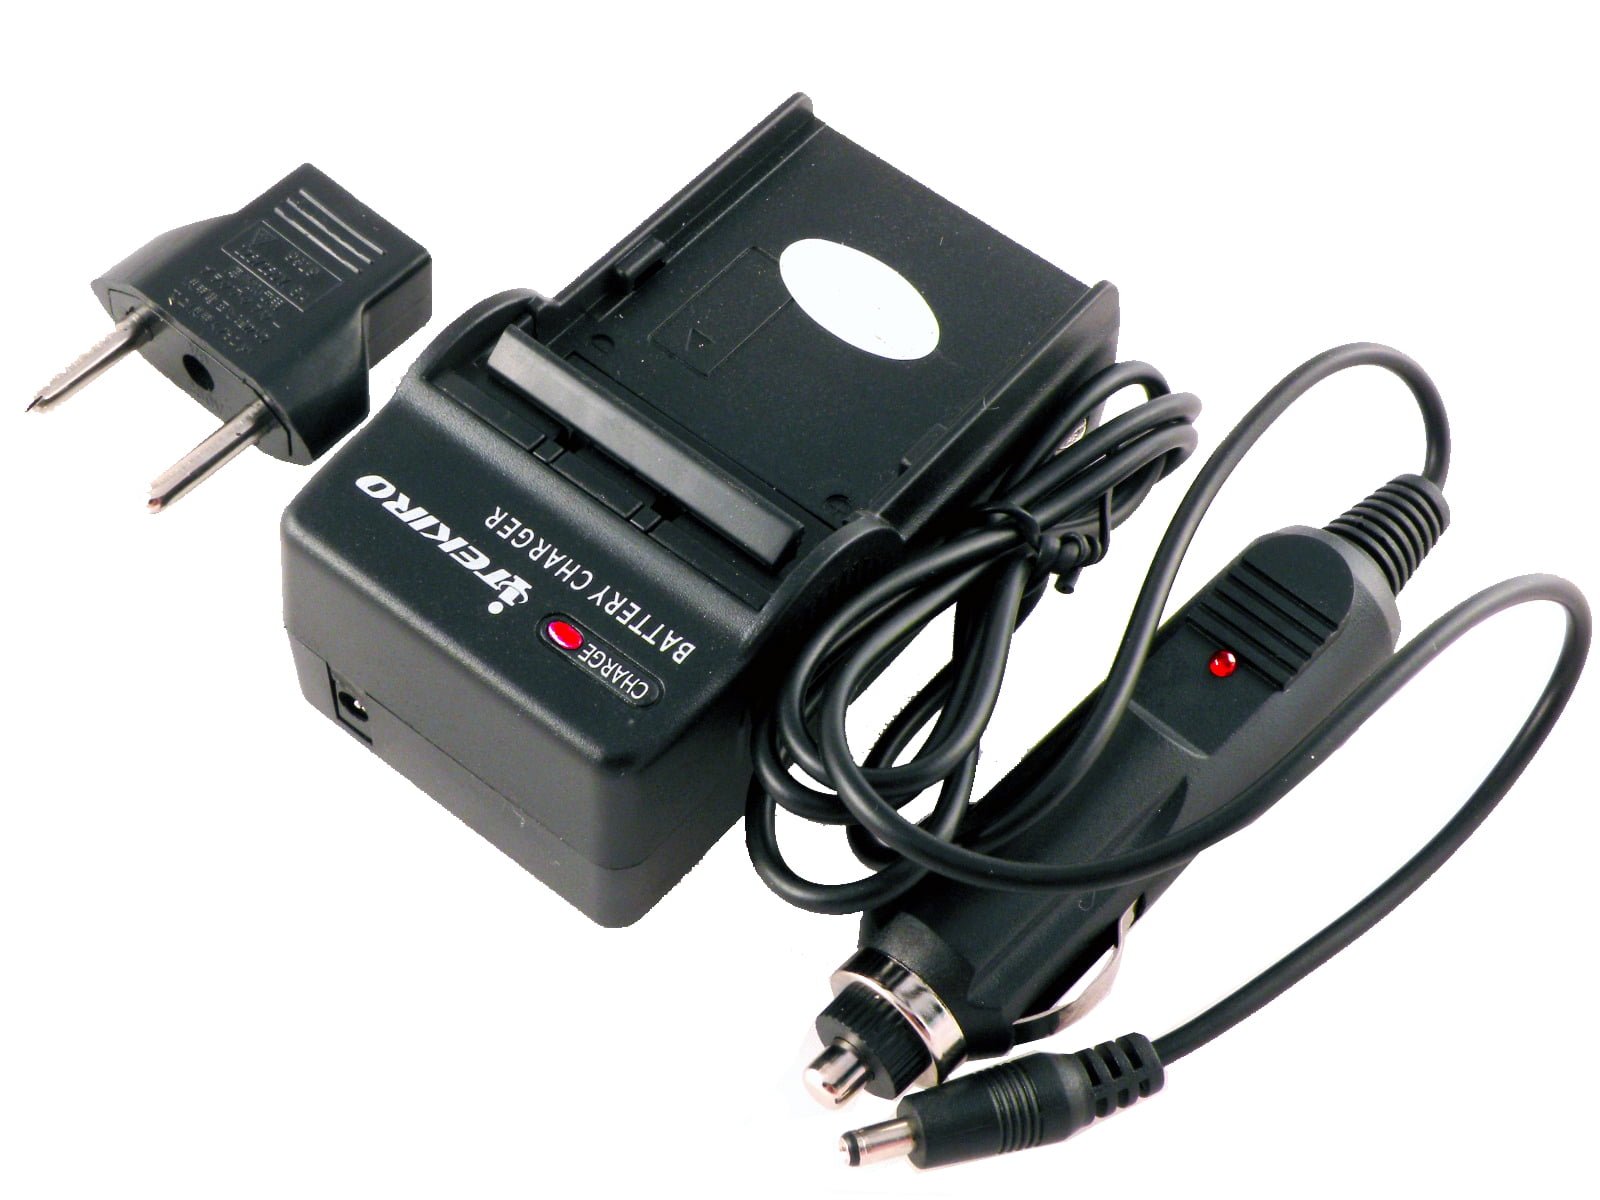 SC-D307 Digital Video Camcorder Battery Pack and LCD USB Travel Charger for Samsung SC-D303 SC-D305